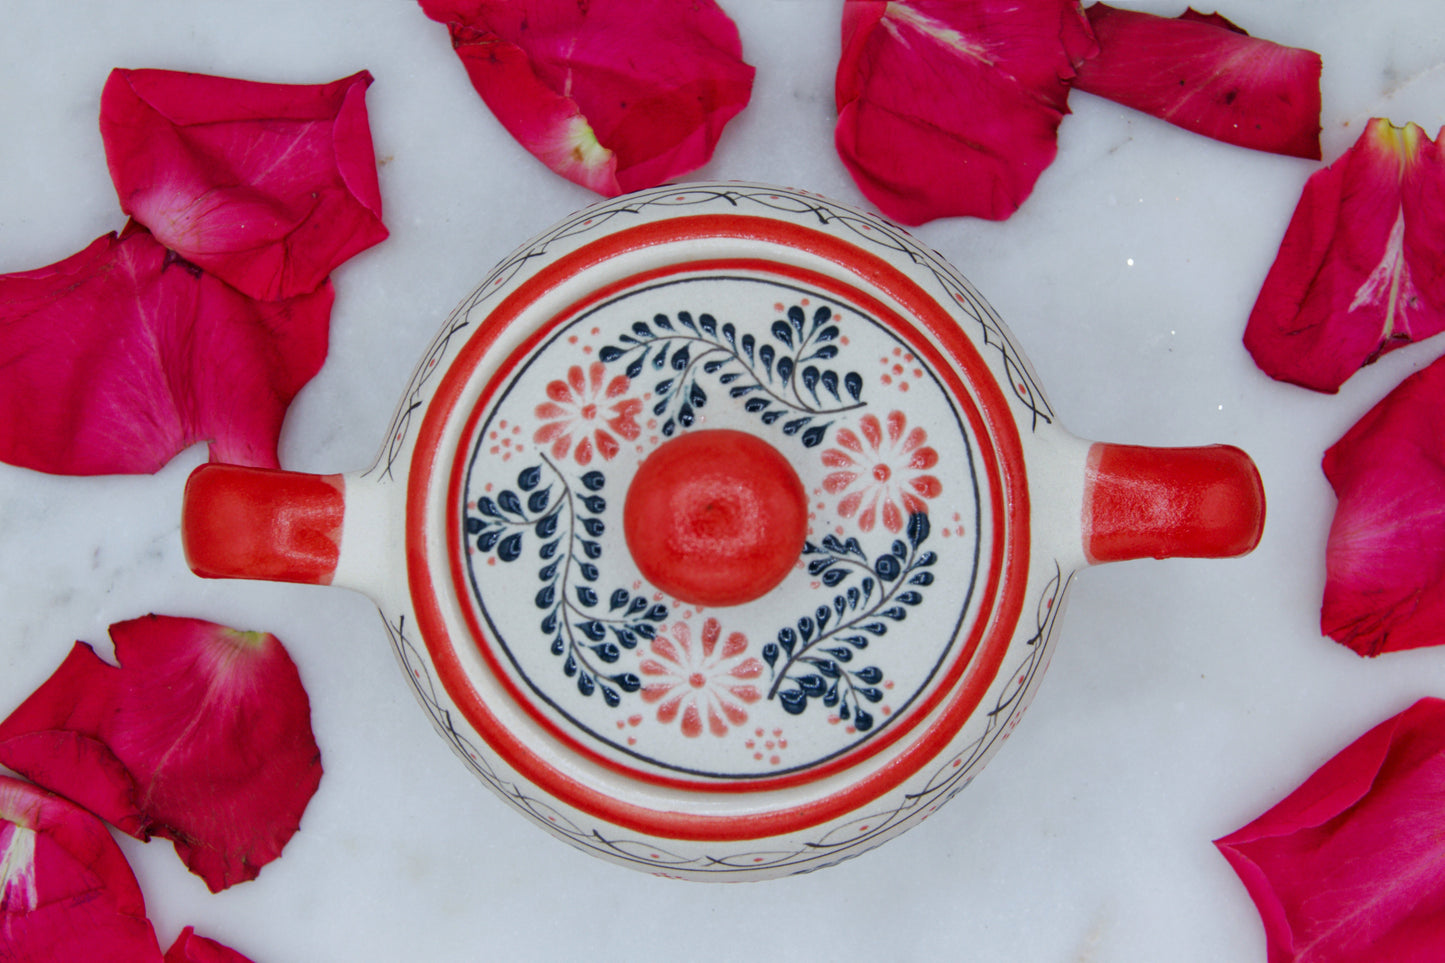 Top view of the handmade artisanal candle in a red floral design talavera with handles on both sides and a closed lid. Custom made by Artisan in Mexico. 100% All Natural Soy Candle. Reuse the talavera as home decor or storage.